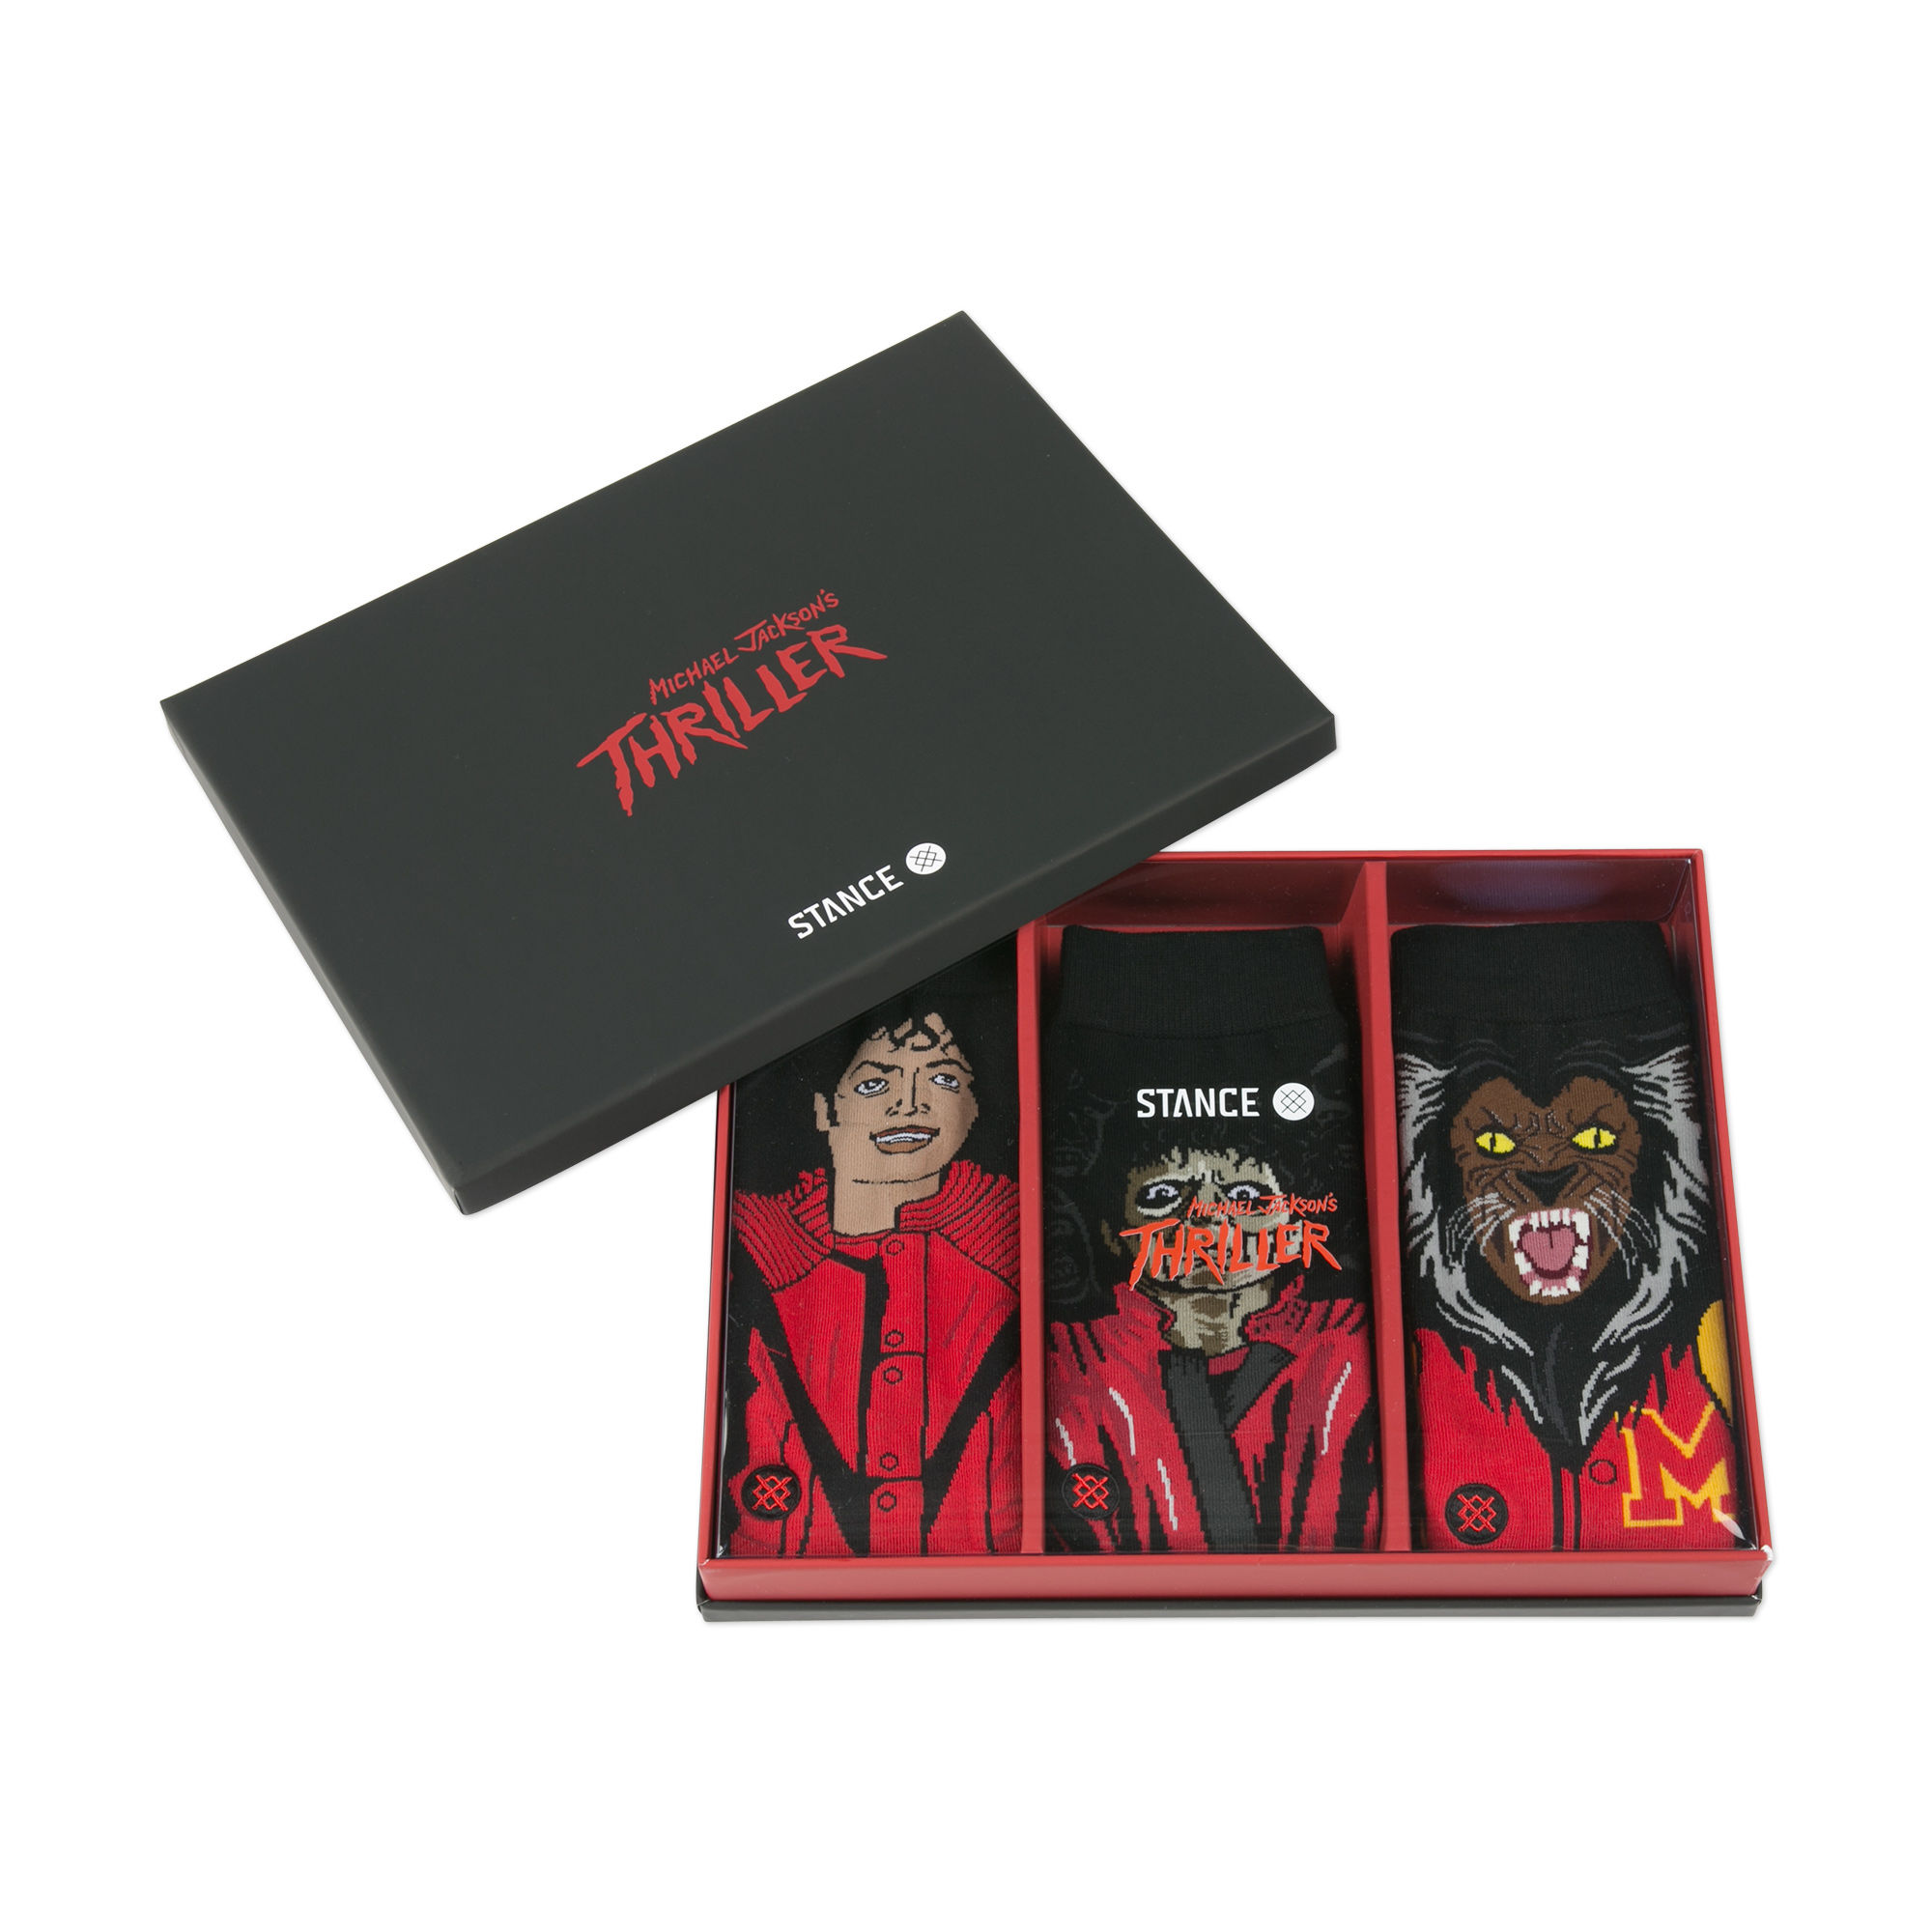 Pastor Partina City Sabueso Stance Released Three Pairs Of Michael Jackson 'Thriller' Socks Just In  Time For Halloween - MJVibe